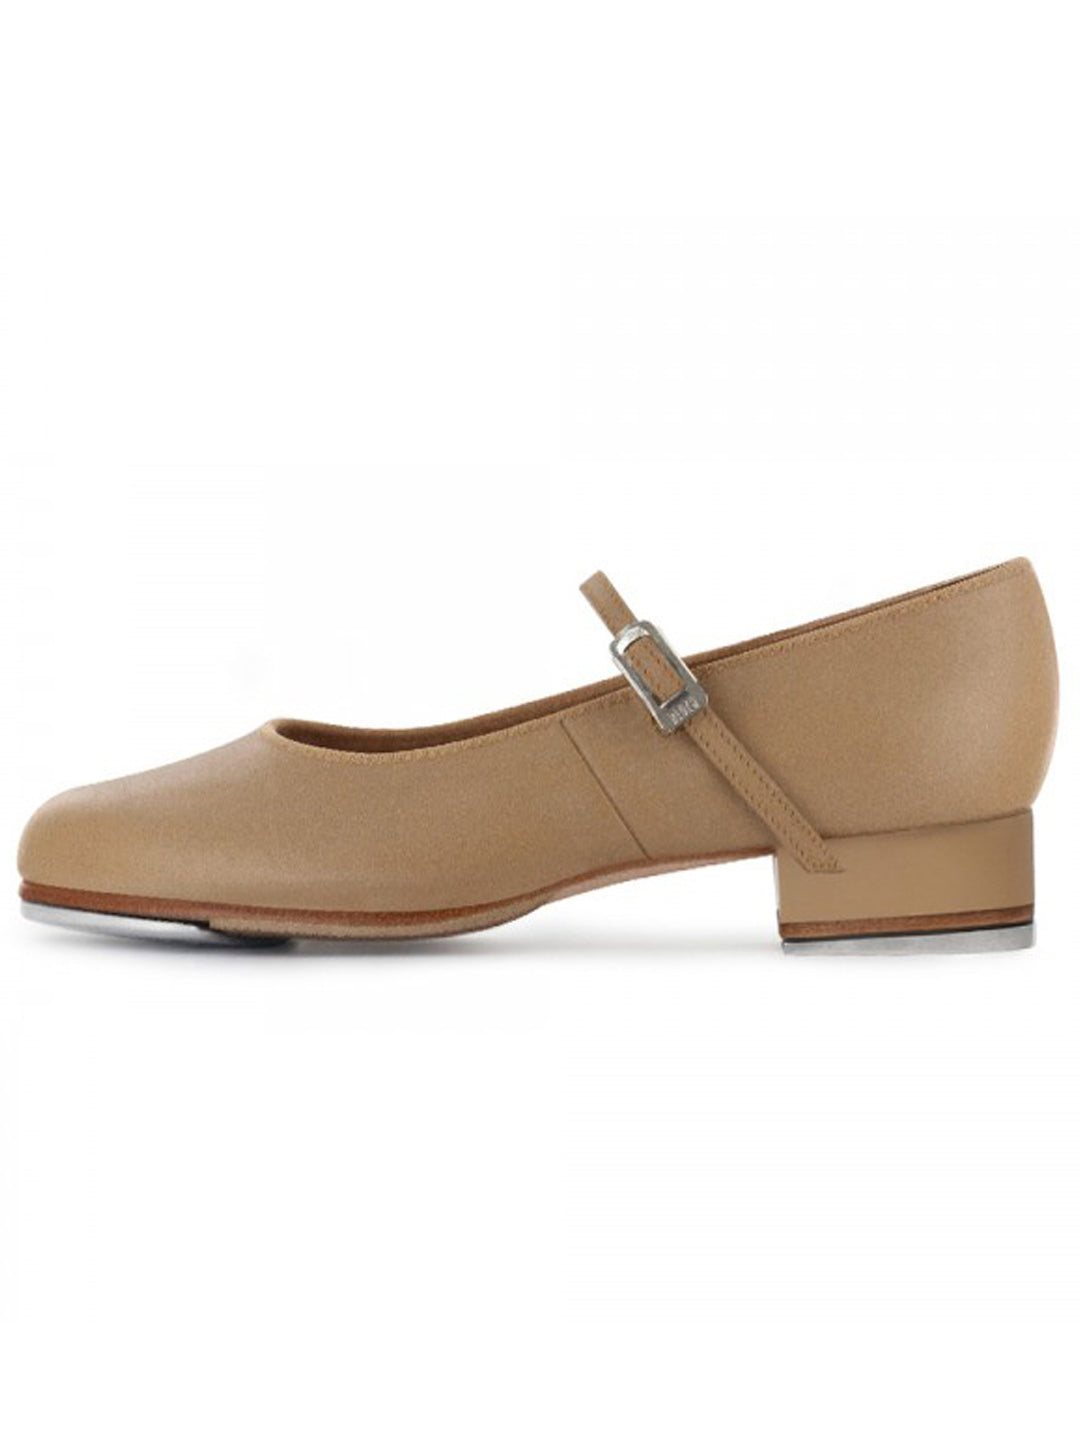 Tap-On Leather Tap Shoe - Child Tan